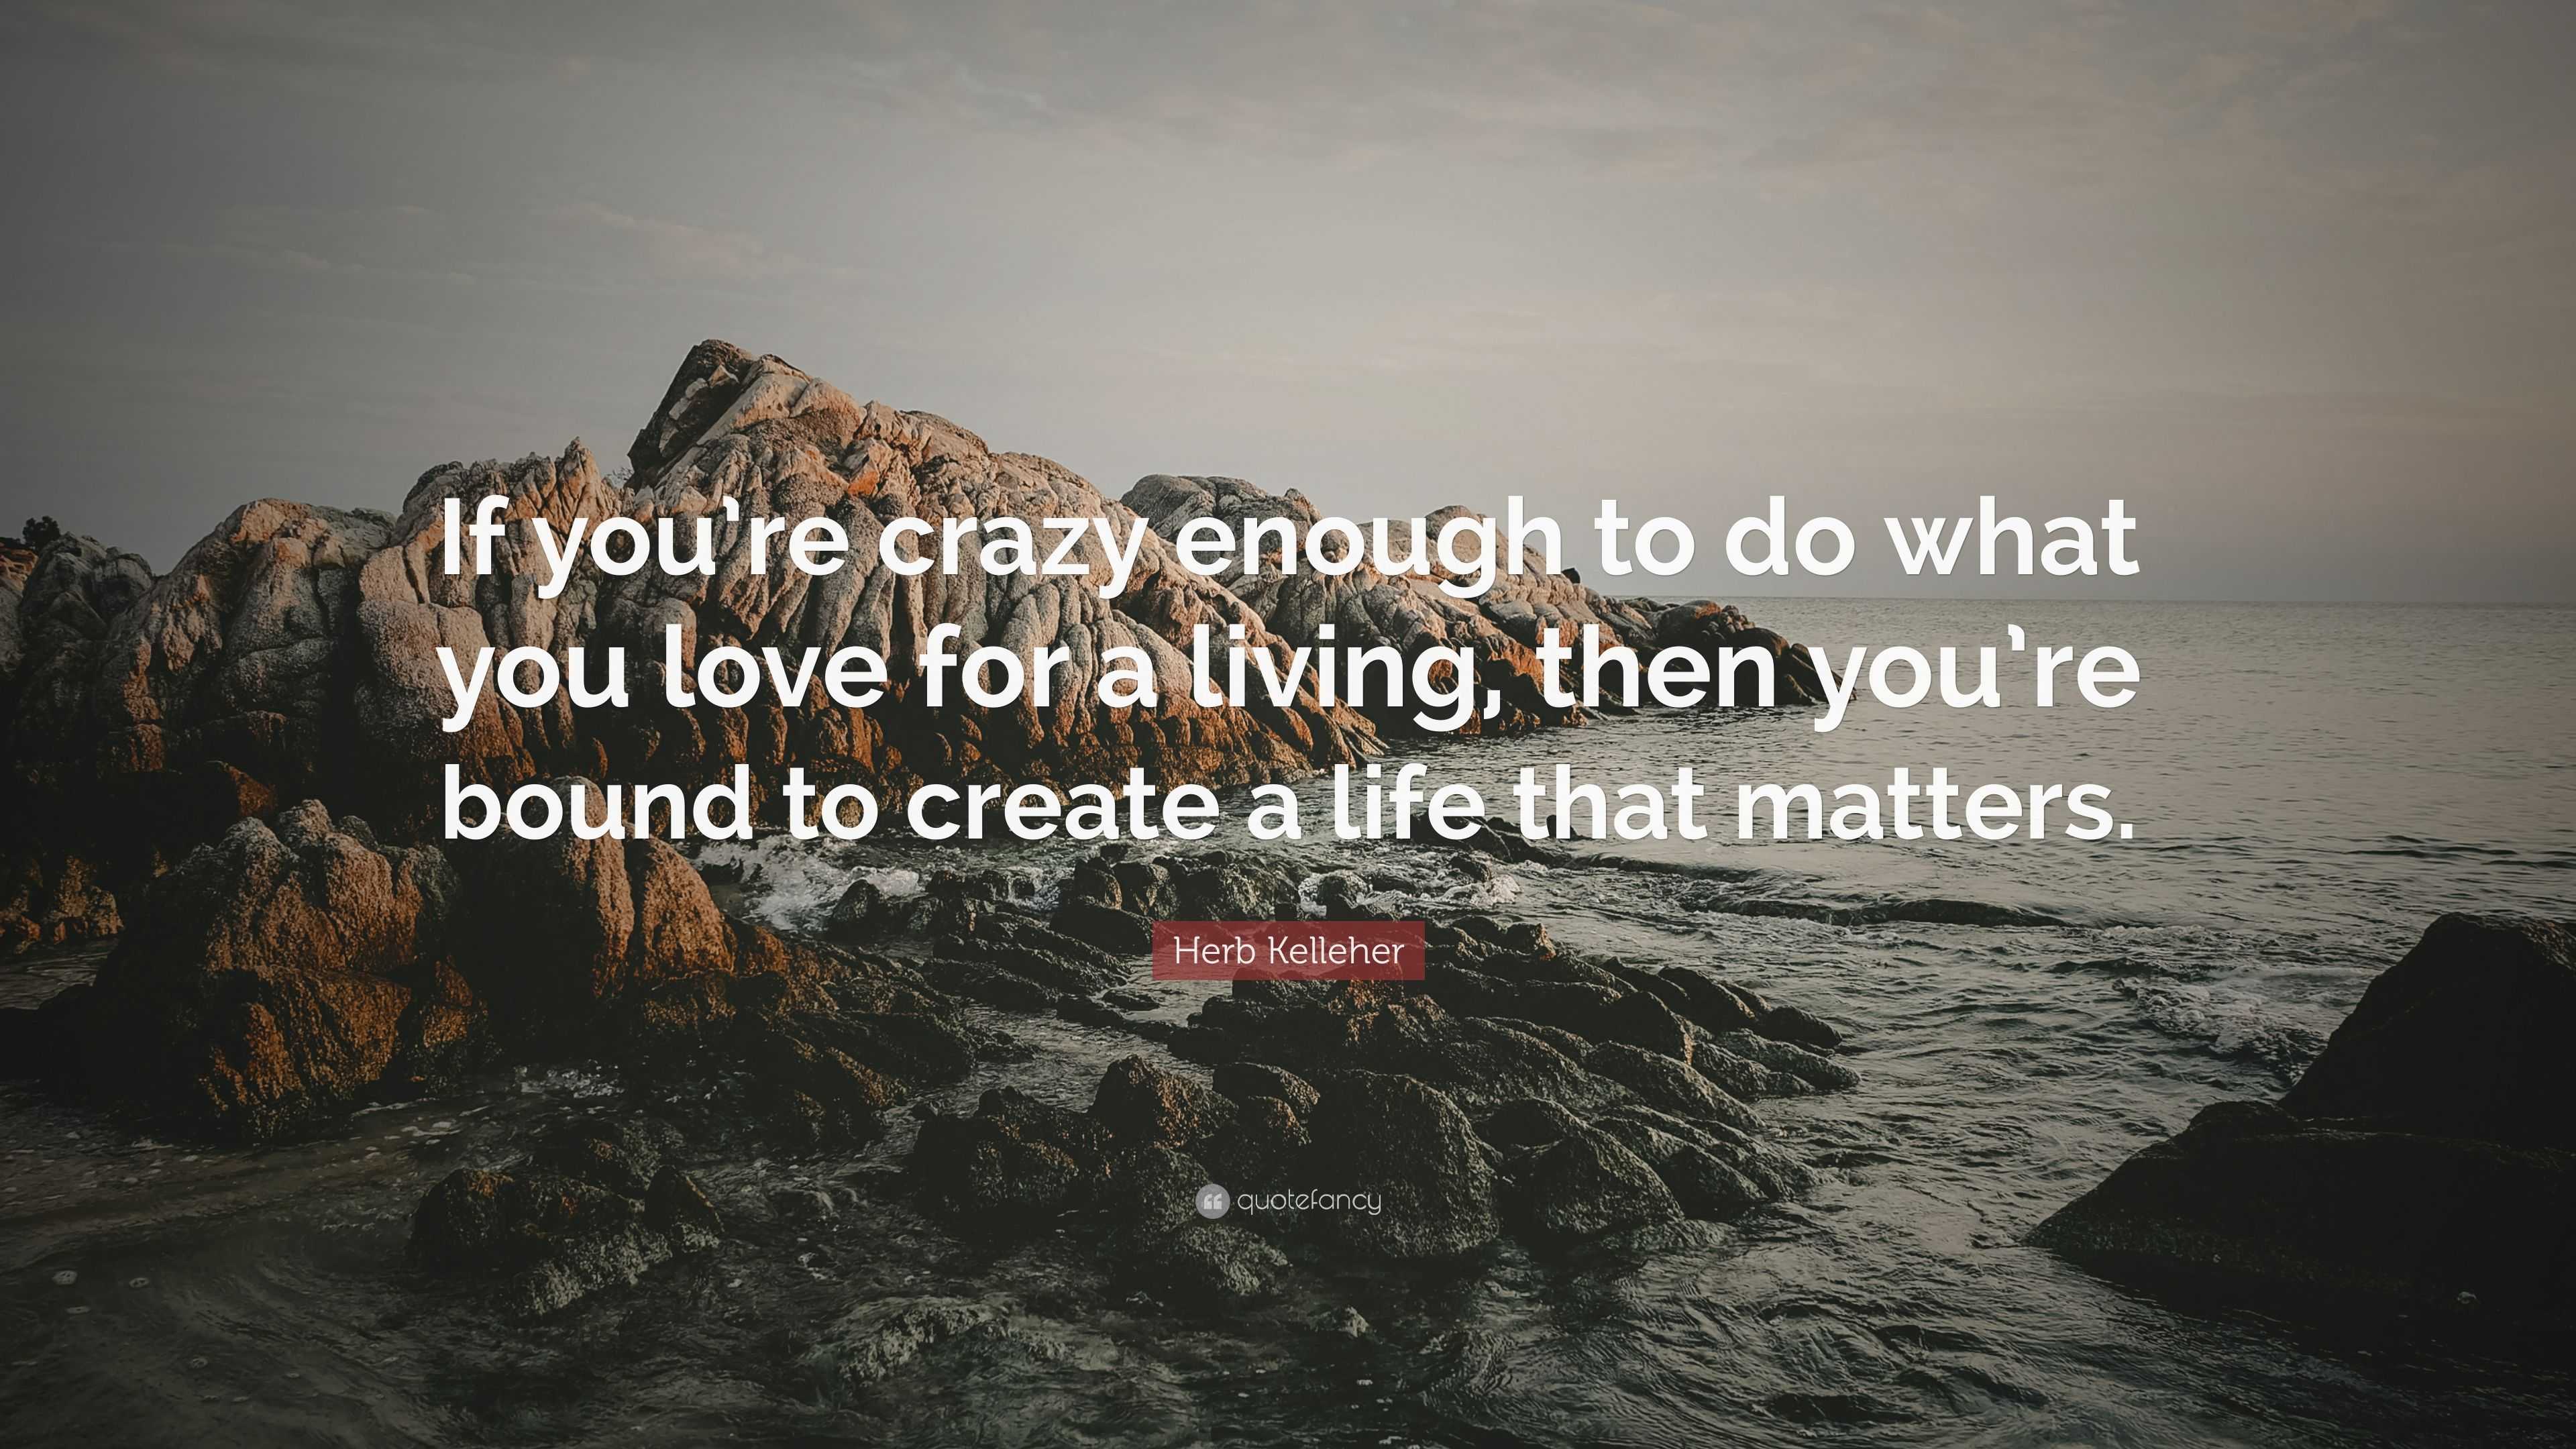 Herb Kelleher Quote: “If you’re crazy enough to do what you love for a